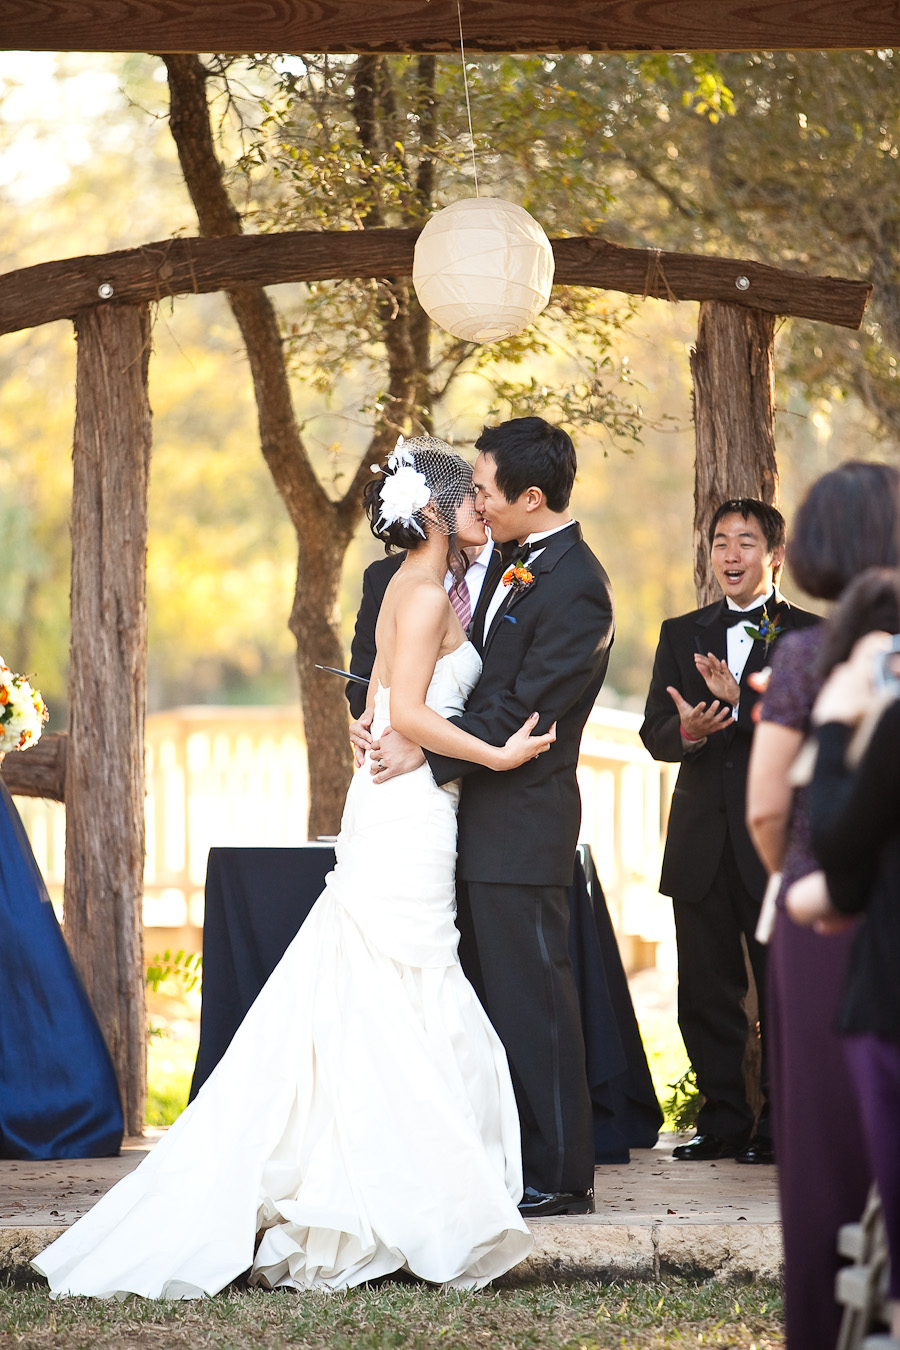 classic country outdoor wedding ceremony at texas old town kyle photographed by table4